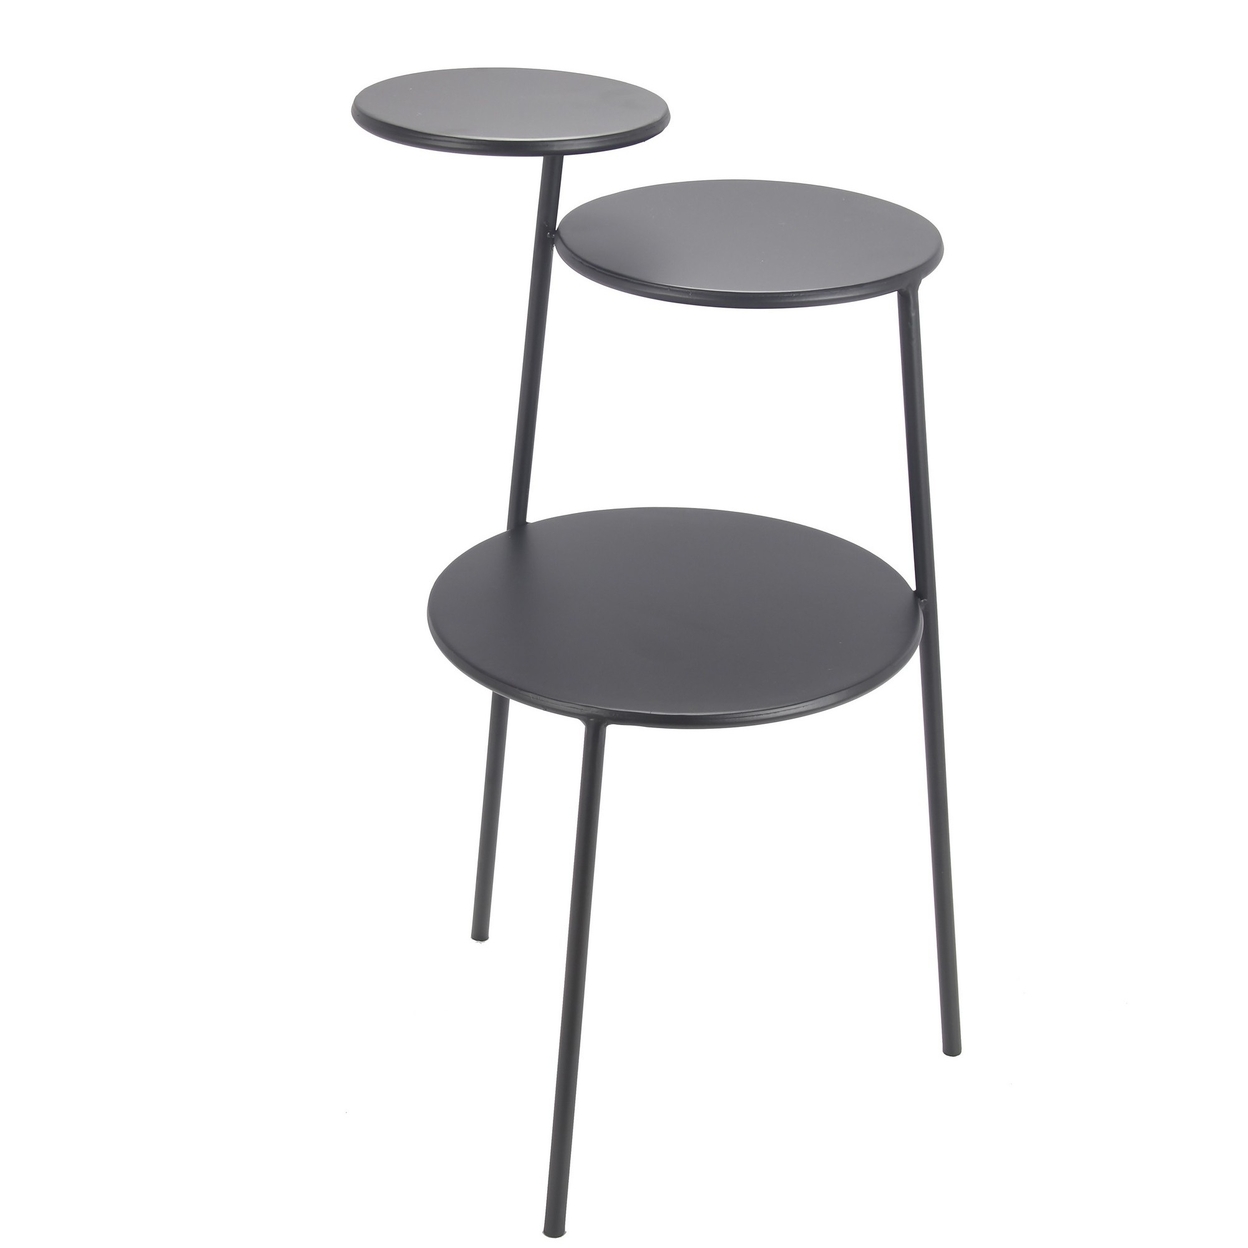 3 Tier Accent Table With Round Metal Top, Black- Saltoro Sherpi